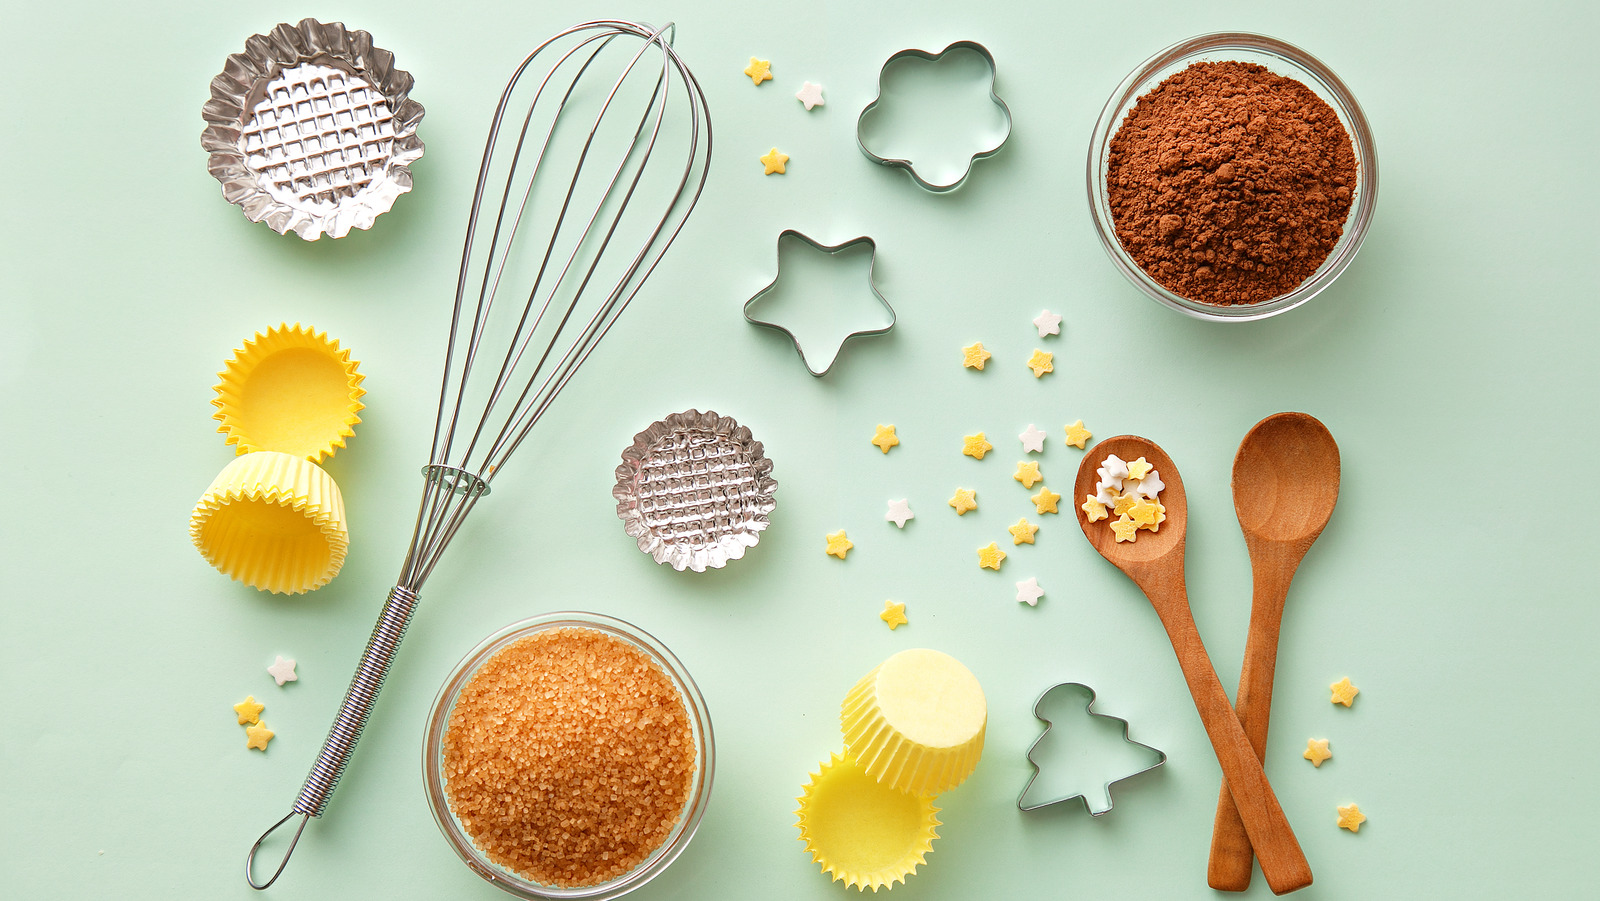 https://www.foodrepublic.com/img/gallery/12-adorable-tools-you-need-for-small-batch-baking/l-intro-1688148632.jpg